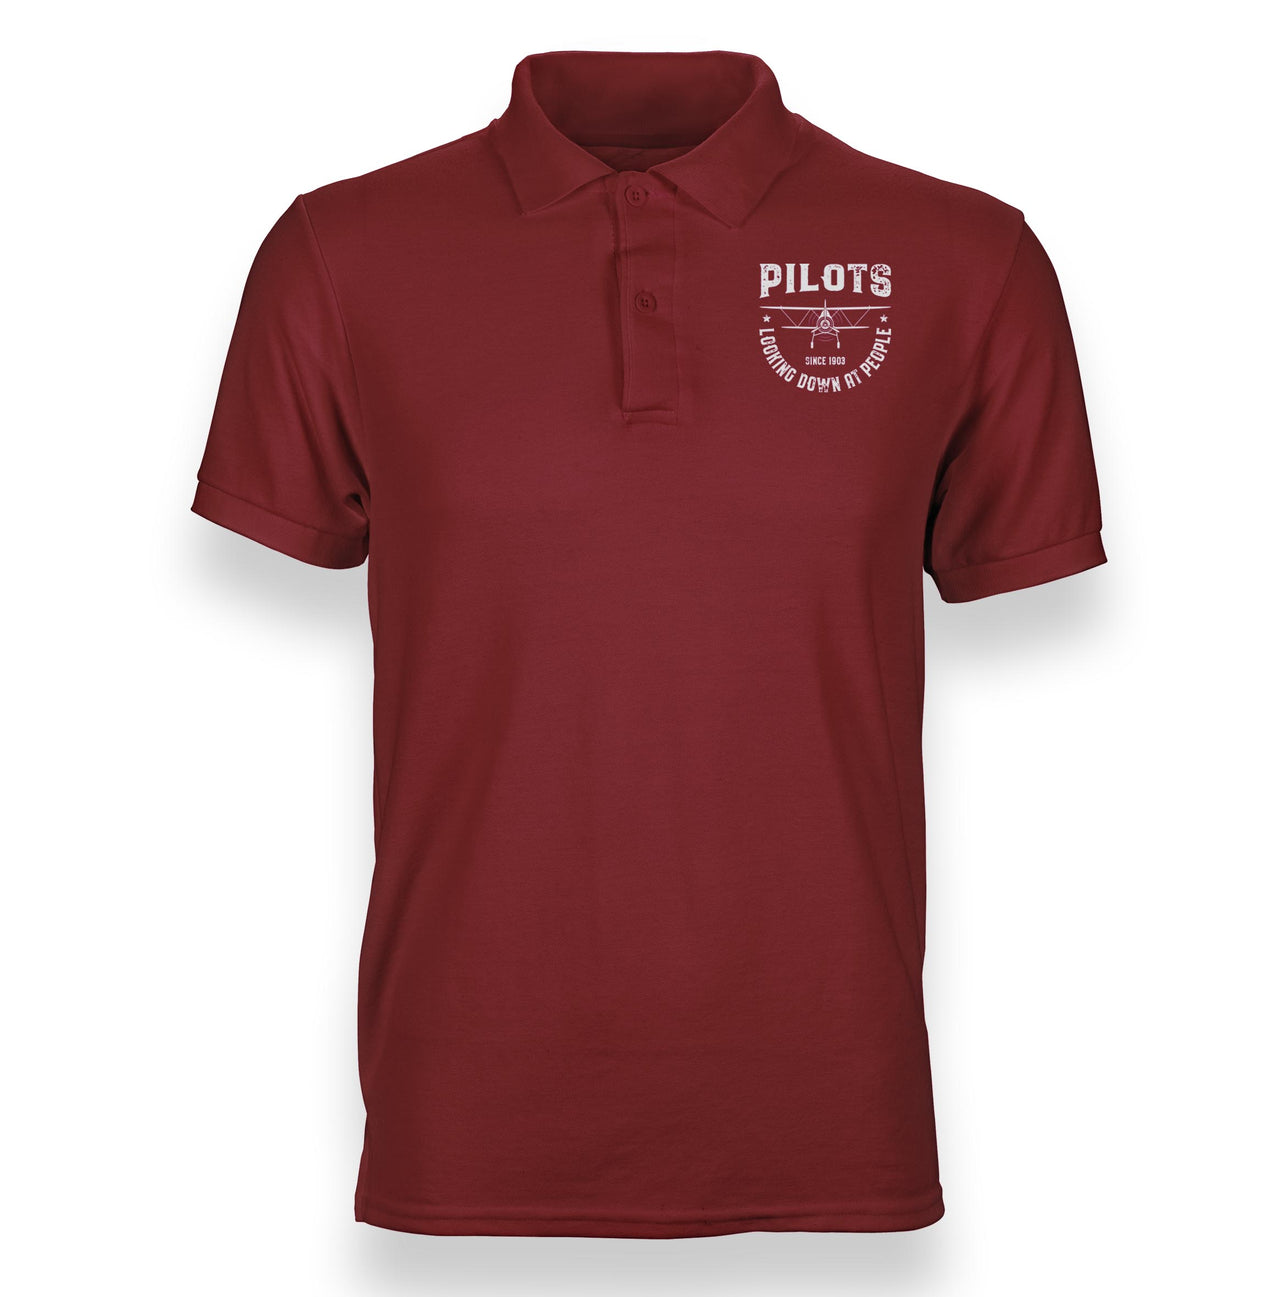 Pilots Looking Down at People Since 1903 Designed Polo T-Shirts